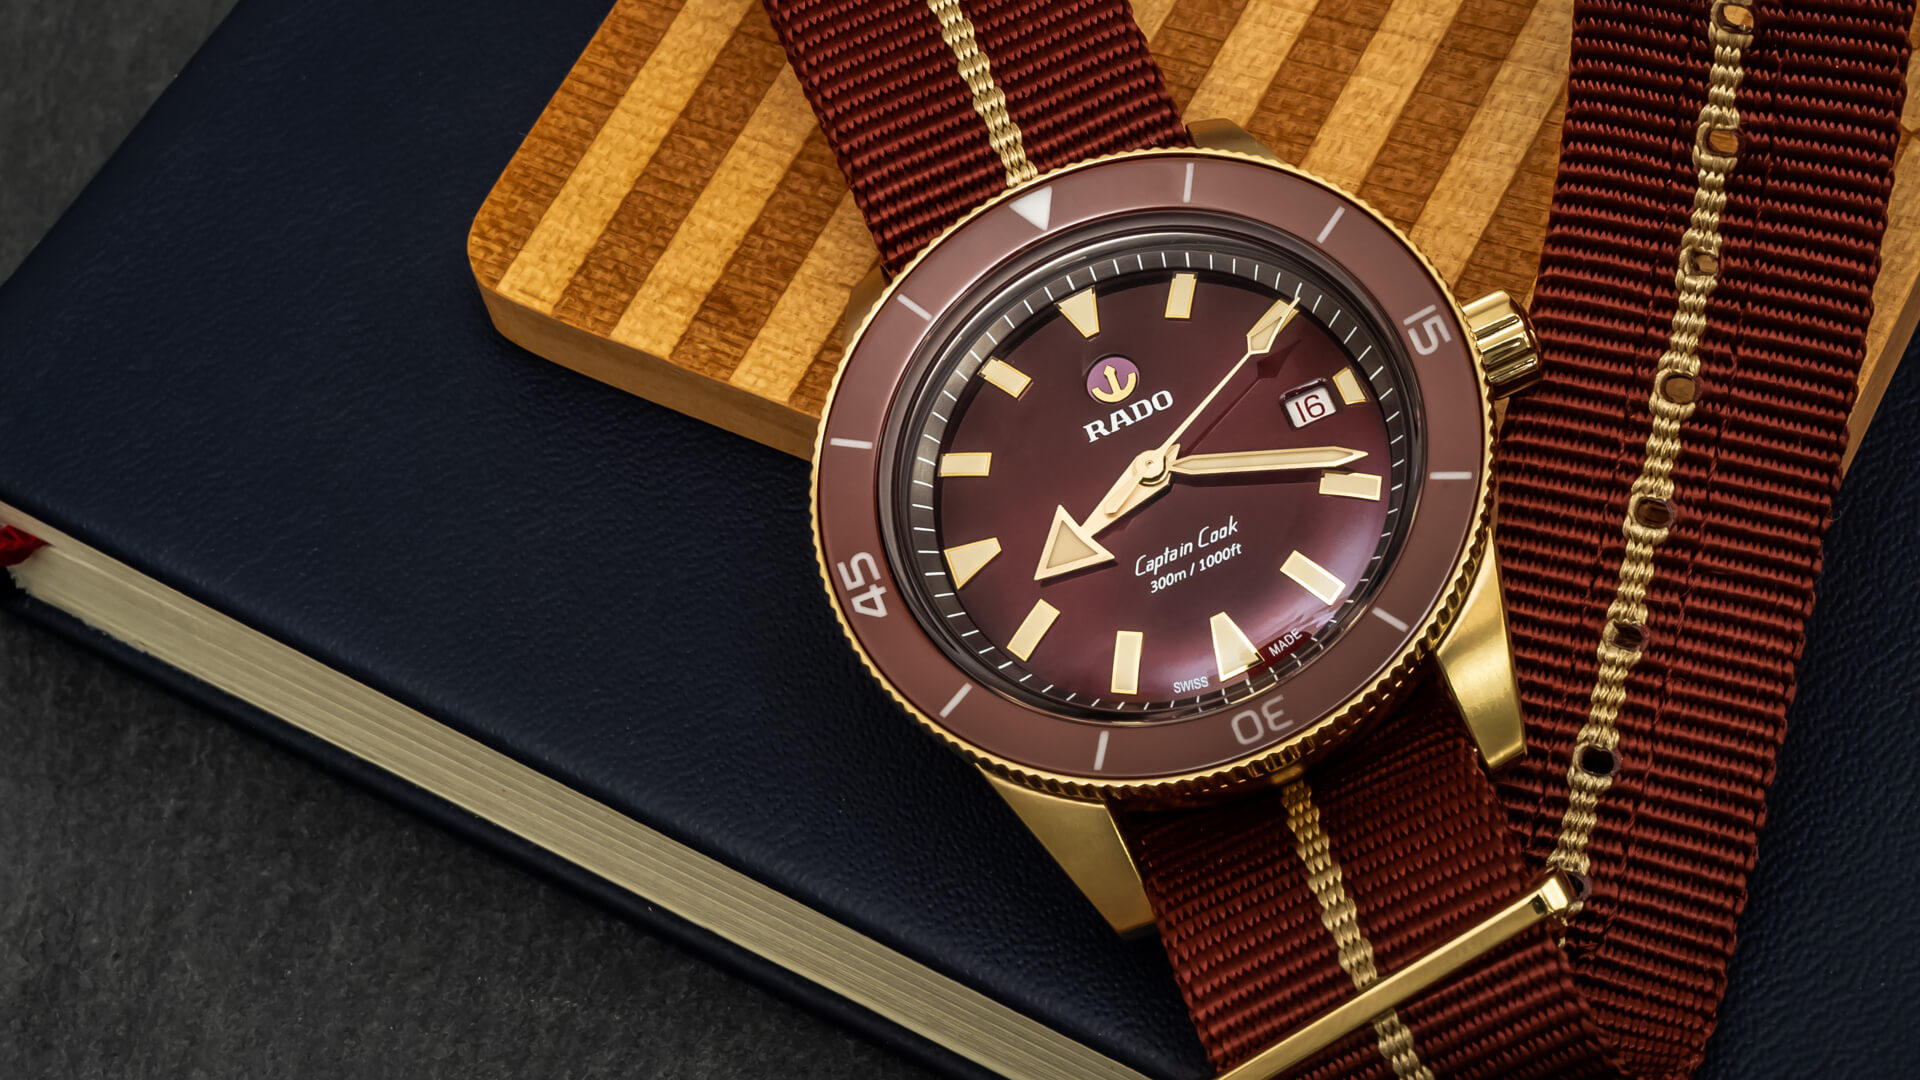 Rado Adds Extra Warmth To Bronze With The Captain Cook Bronze Burgundy Watch